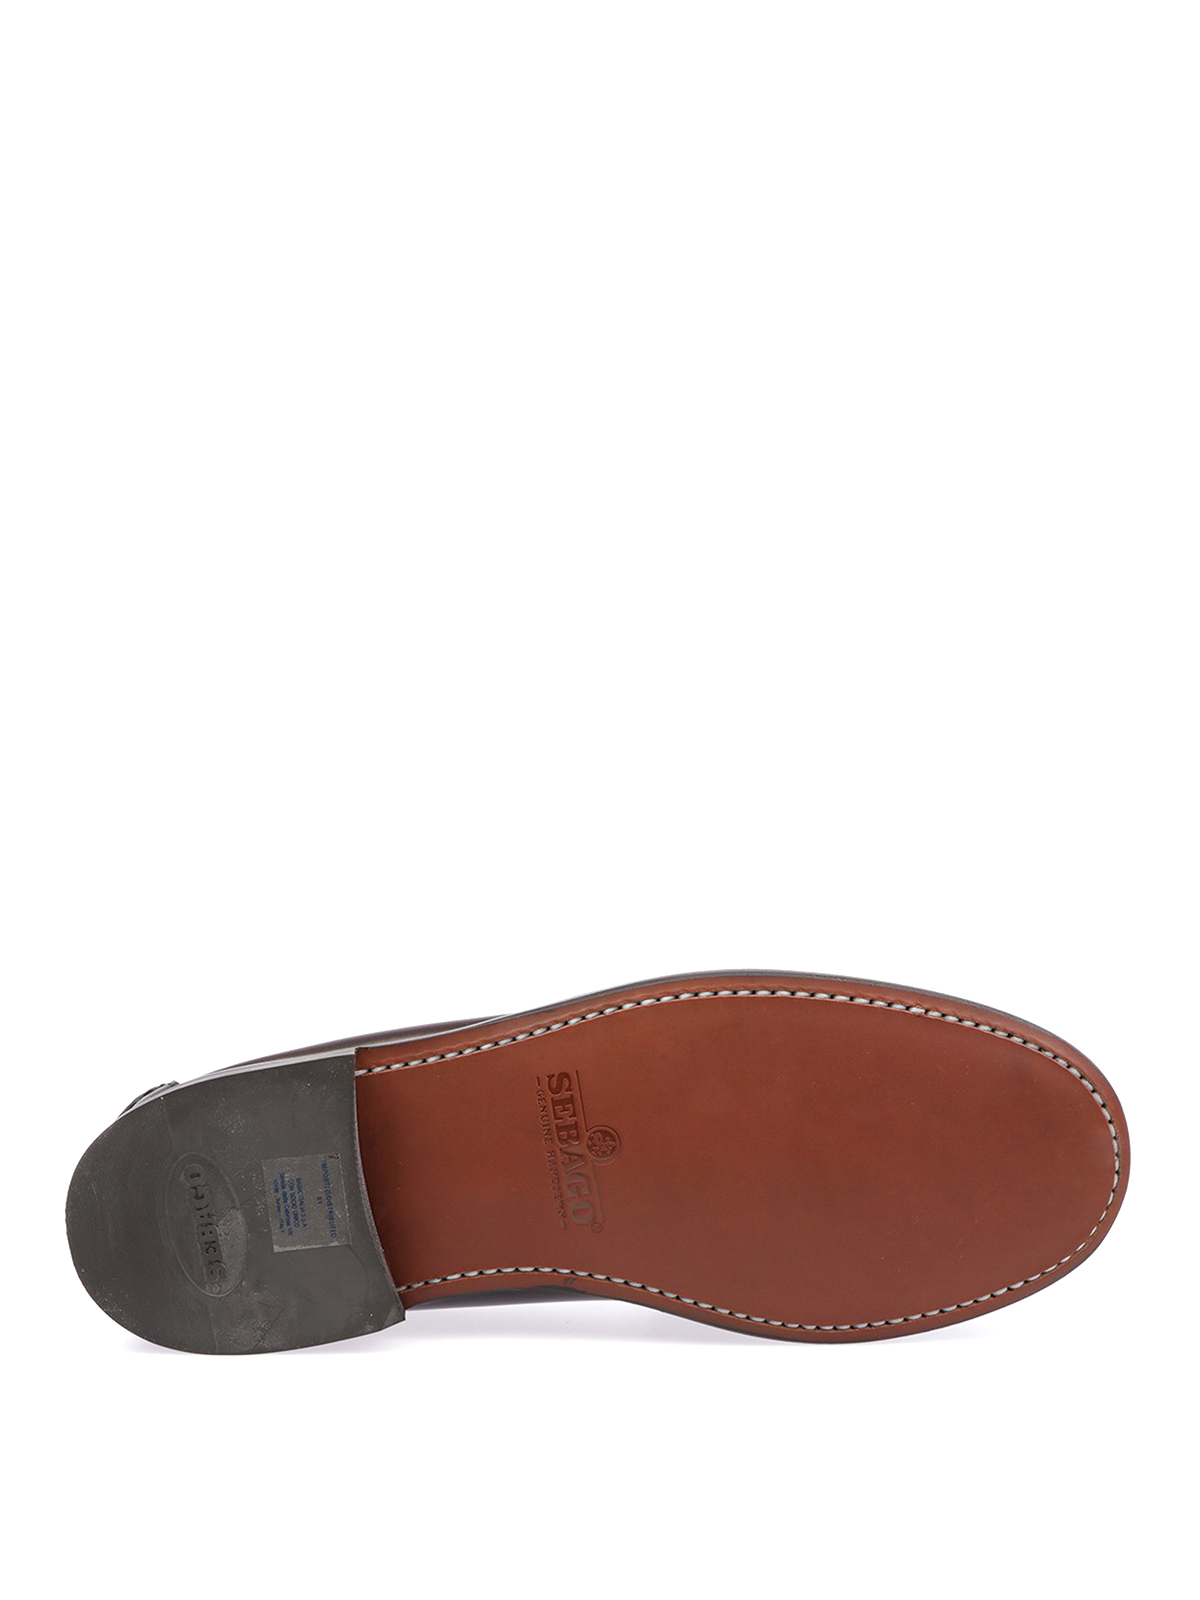 Loafers & Slippers Sebago - Classic penny loafers - 7000300903